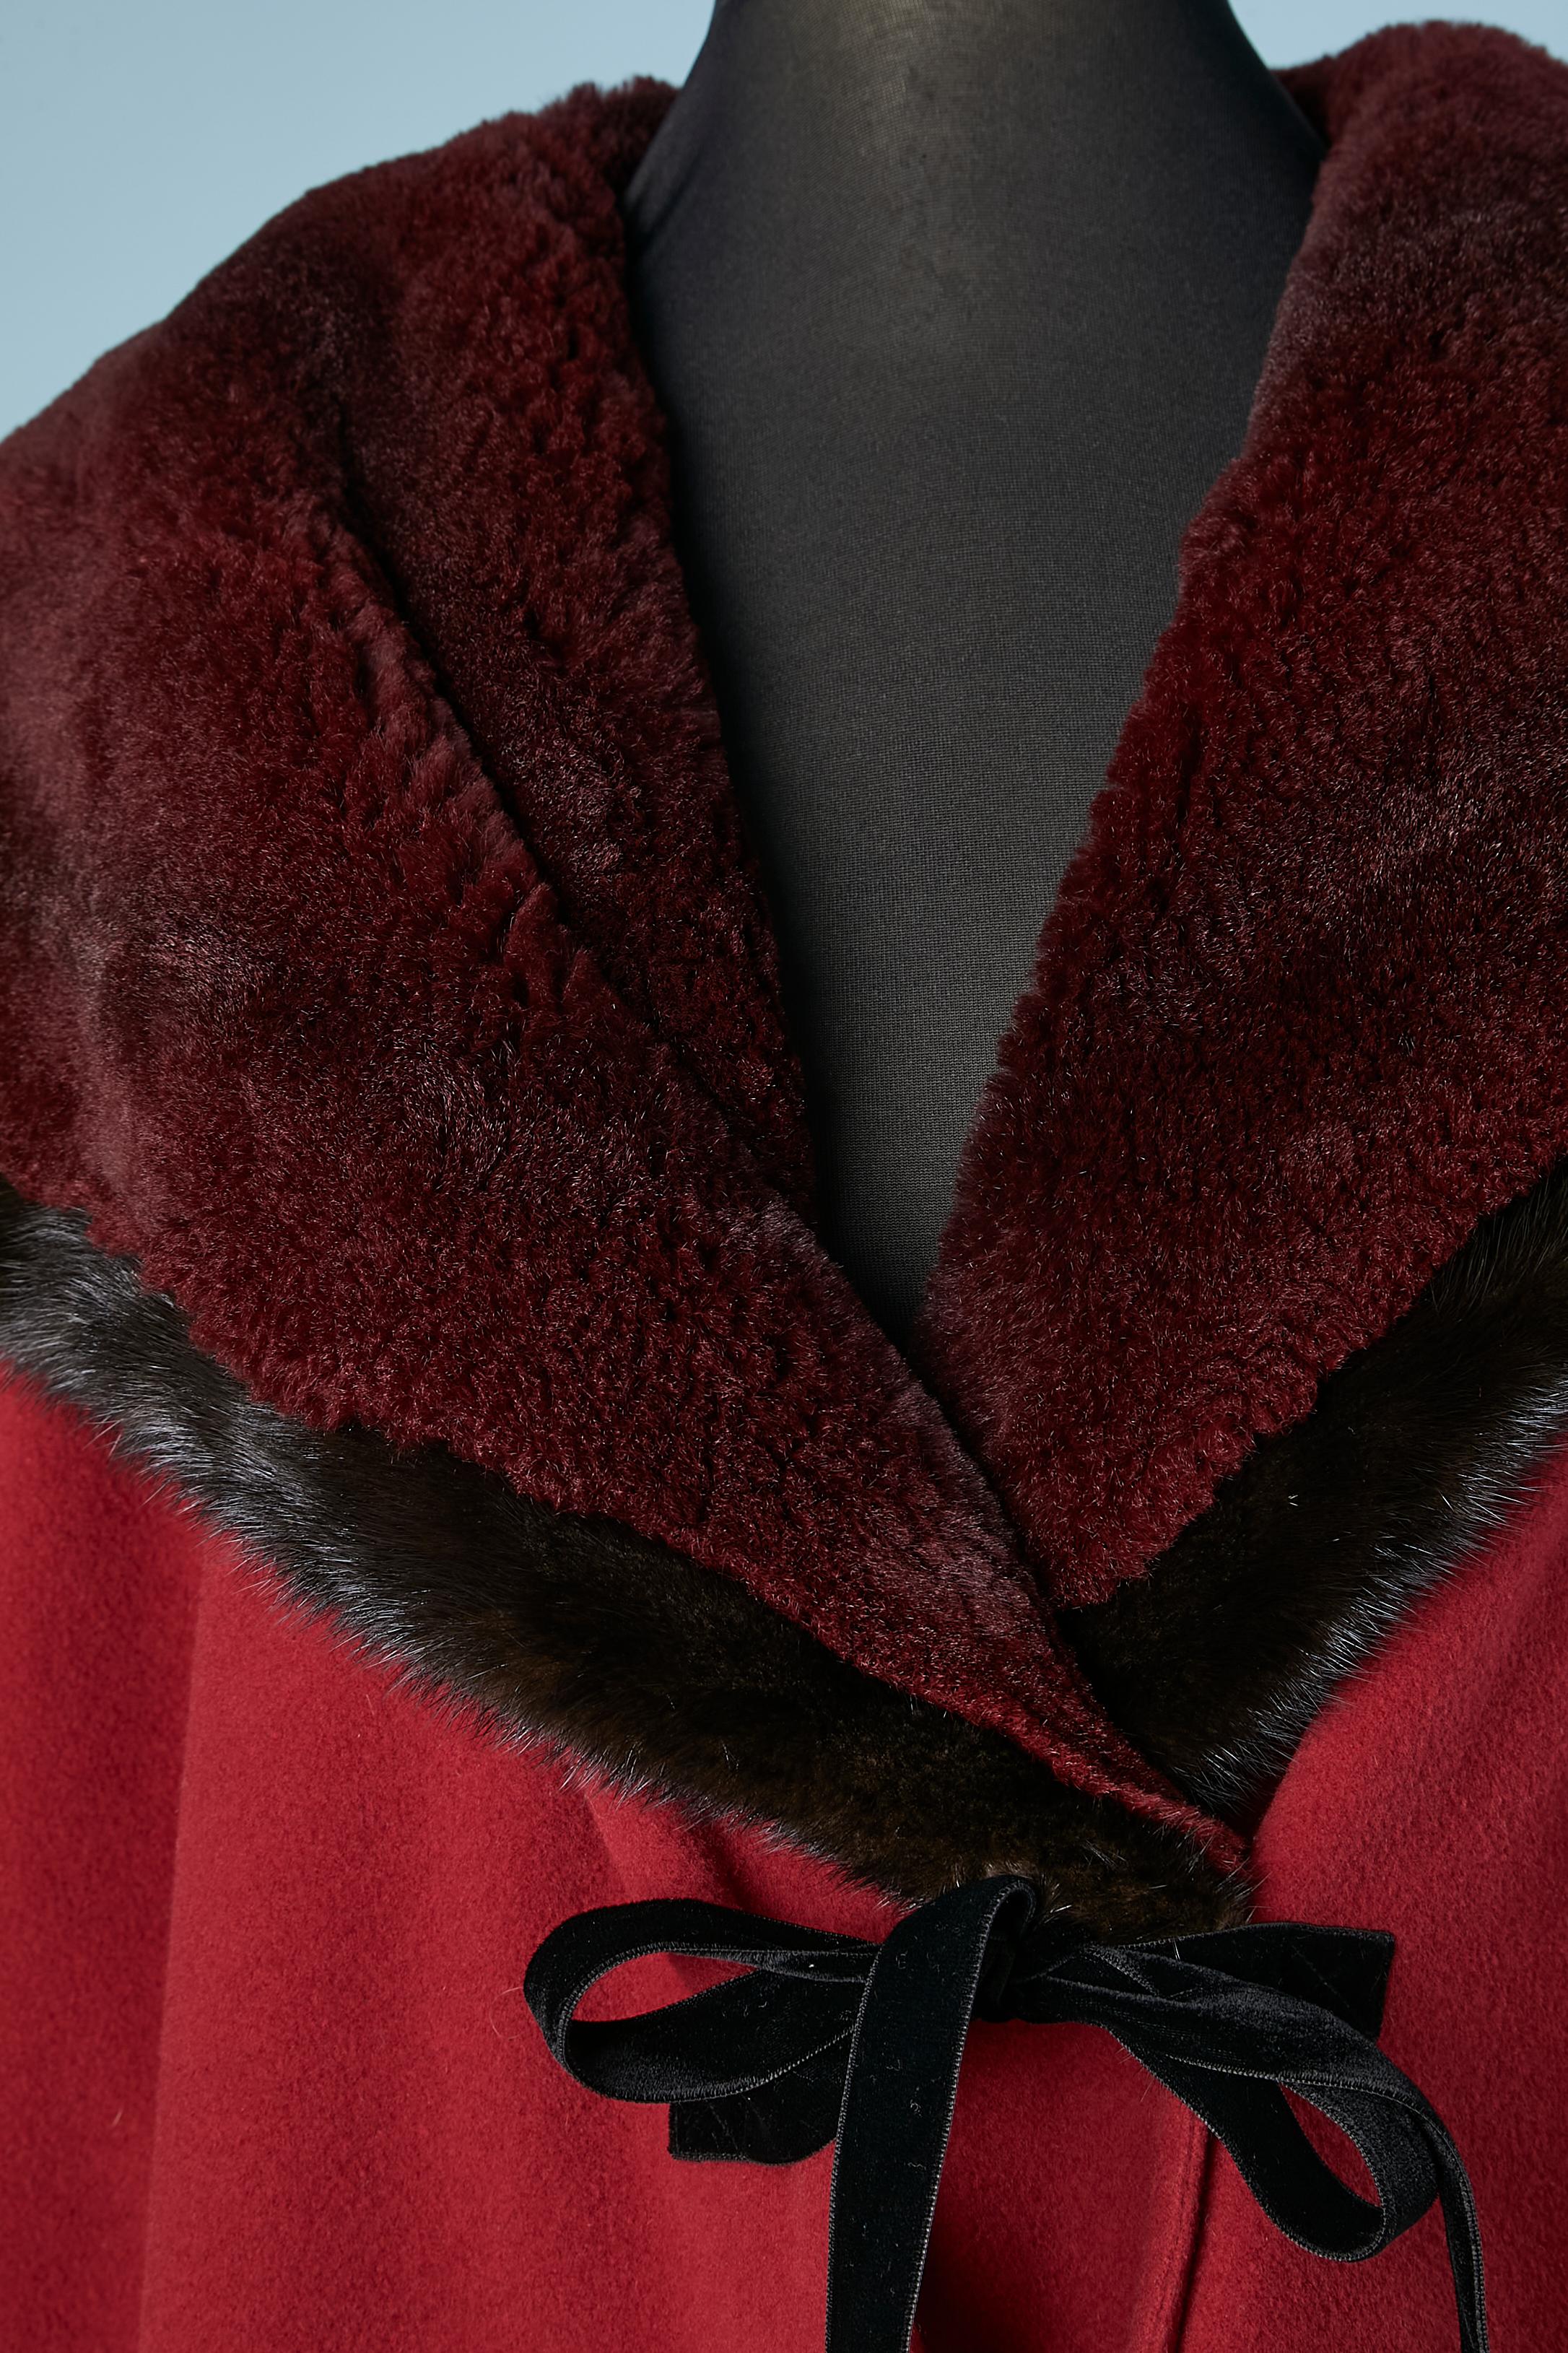 Double-breasted red wool jacket with collar and cuff furs and black velvet bow.
Red satin lining quilted and top-stitched. Shoulder pad. Raglan sleeve. Inside button and buttonhole.
SIZE XL